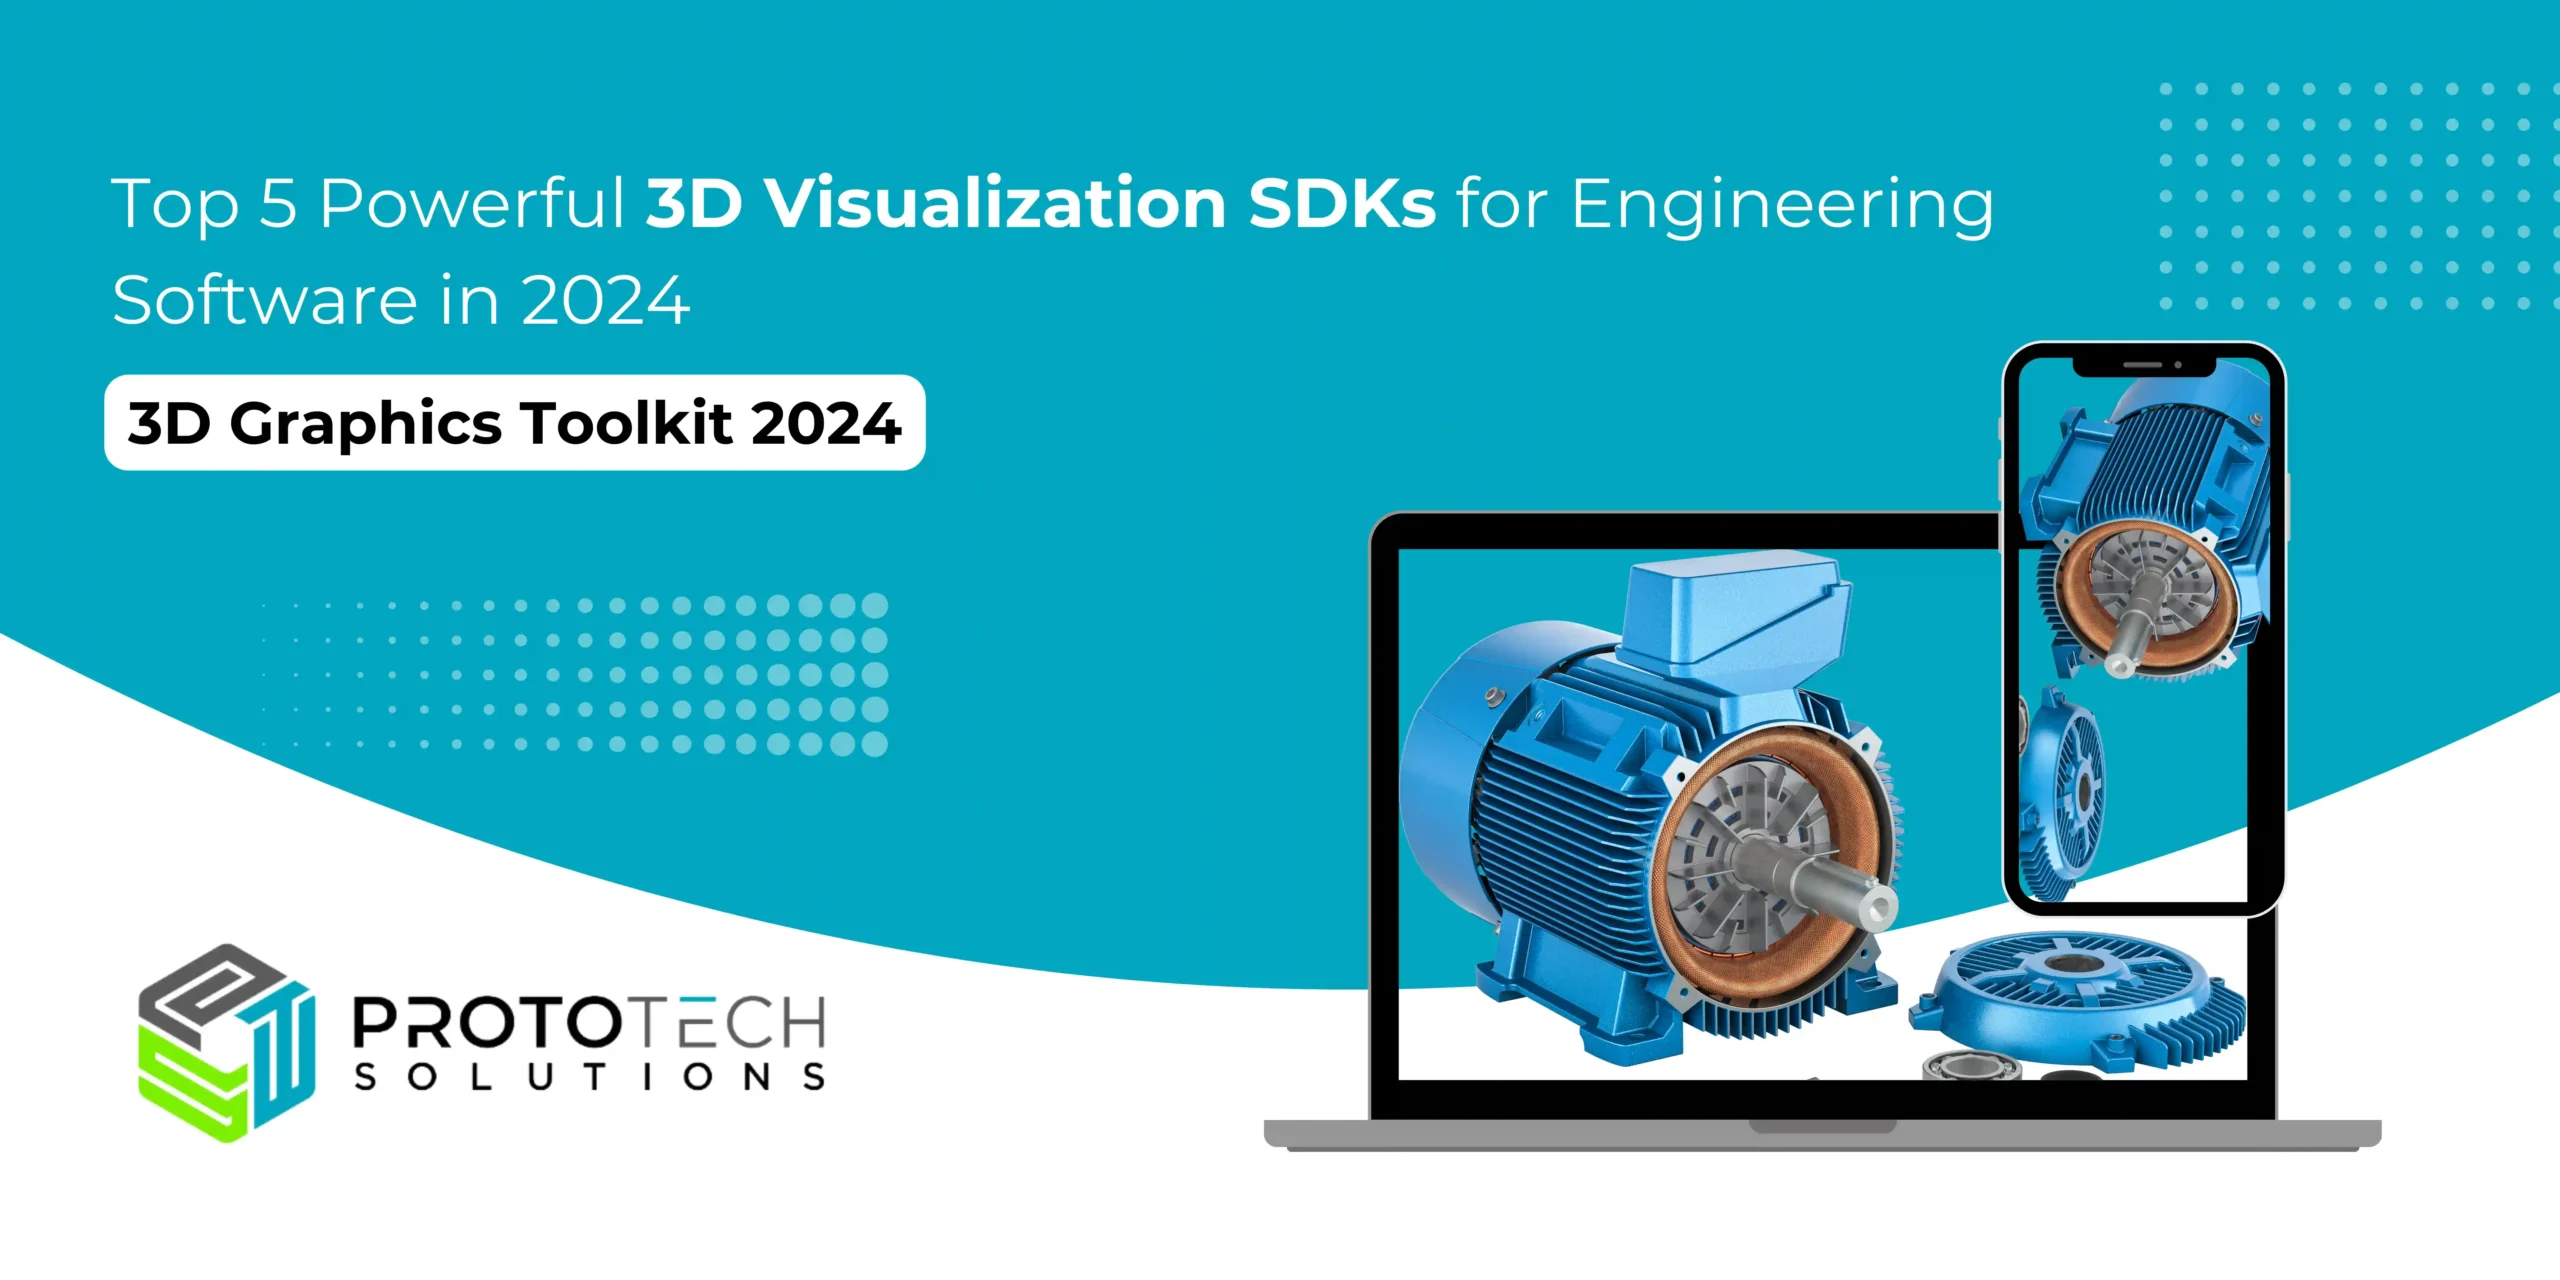 3D visualization SDKs for engineering software development in 2024